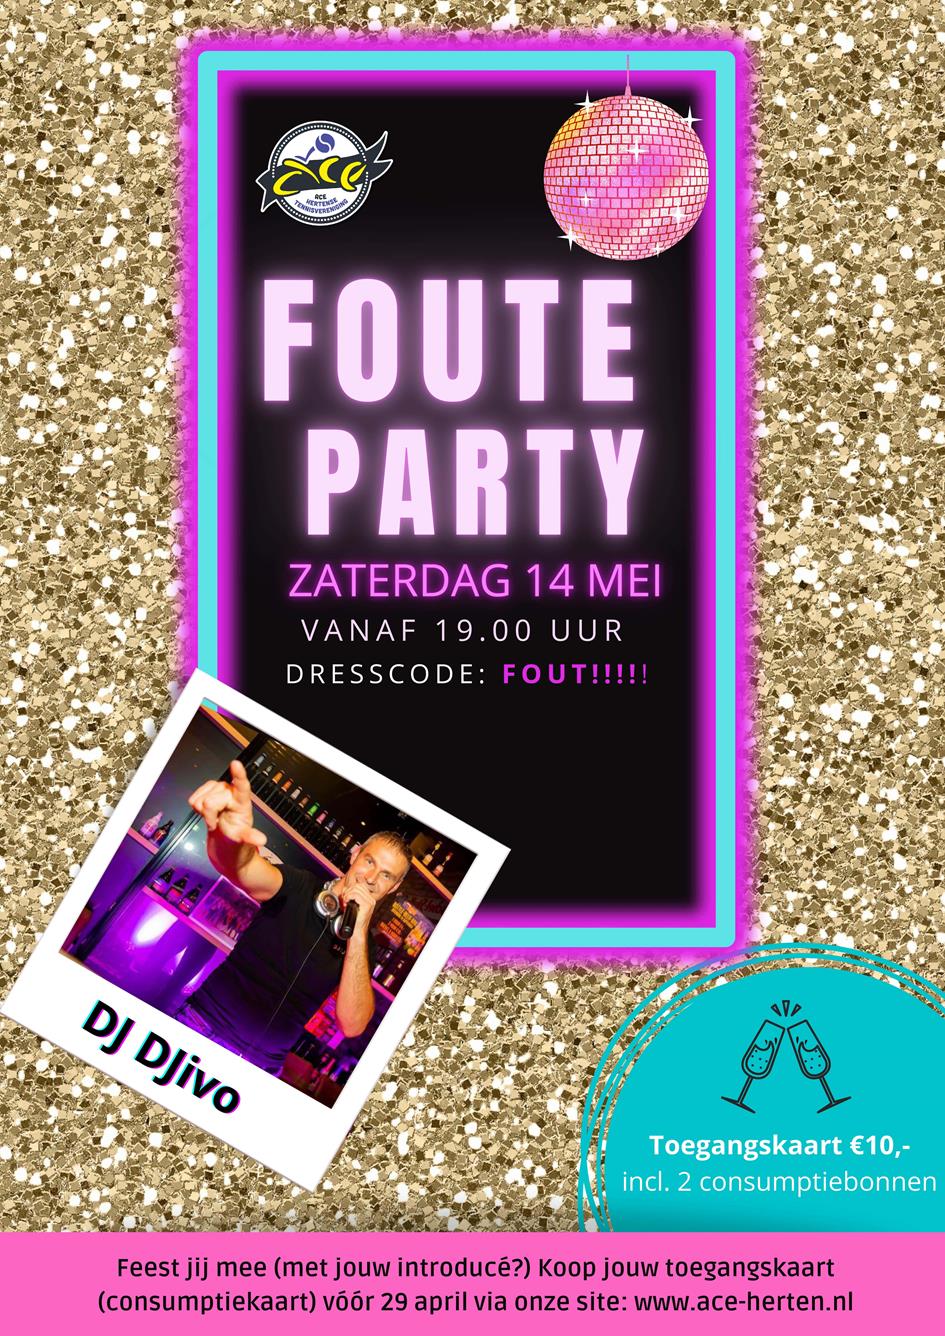 Poster Foute Party afbeelding-min.jpg